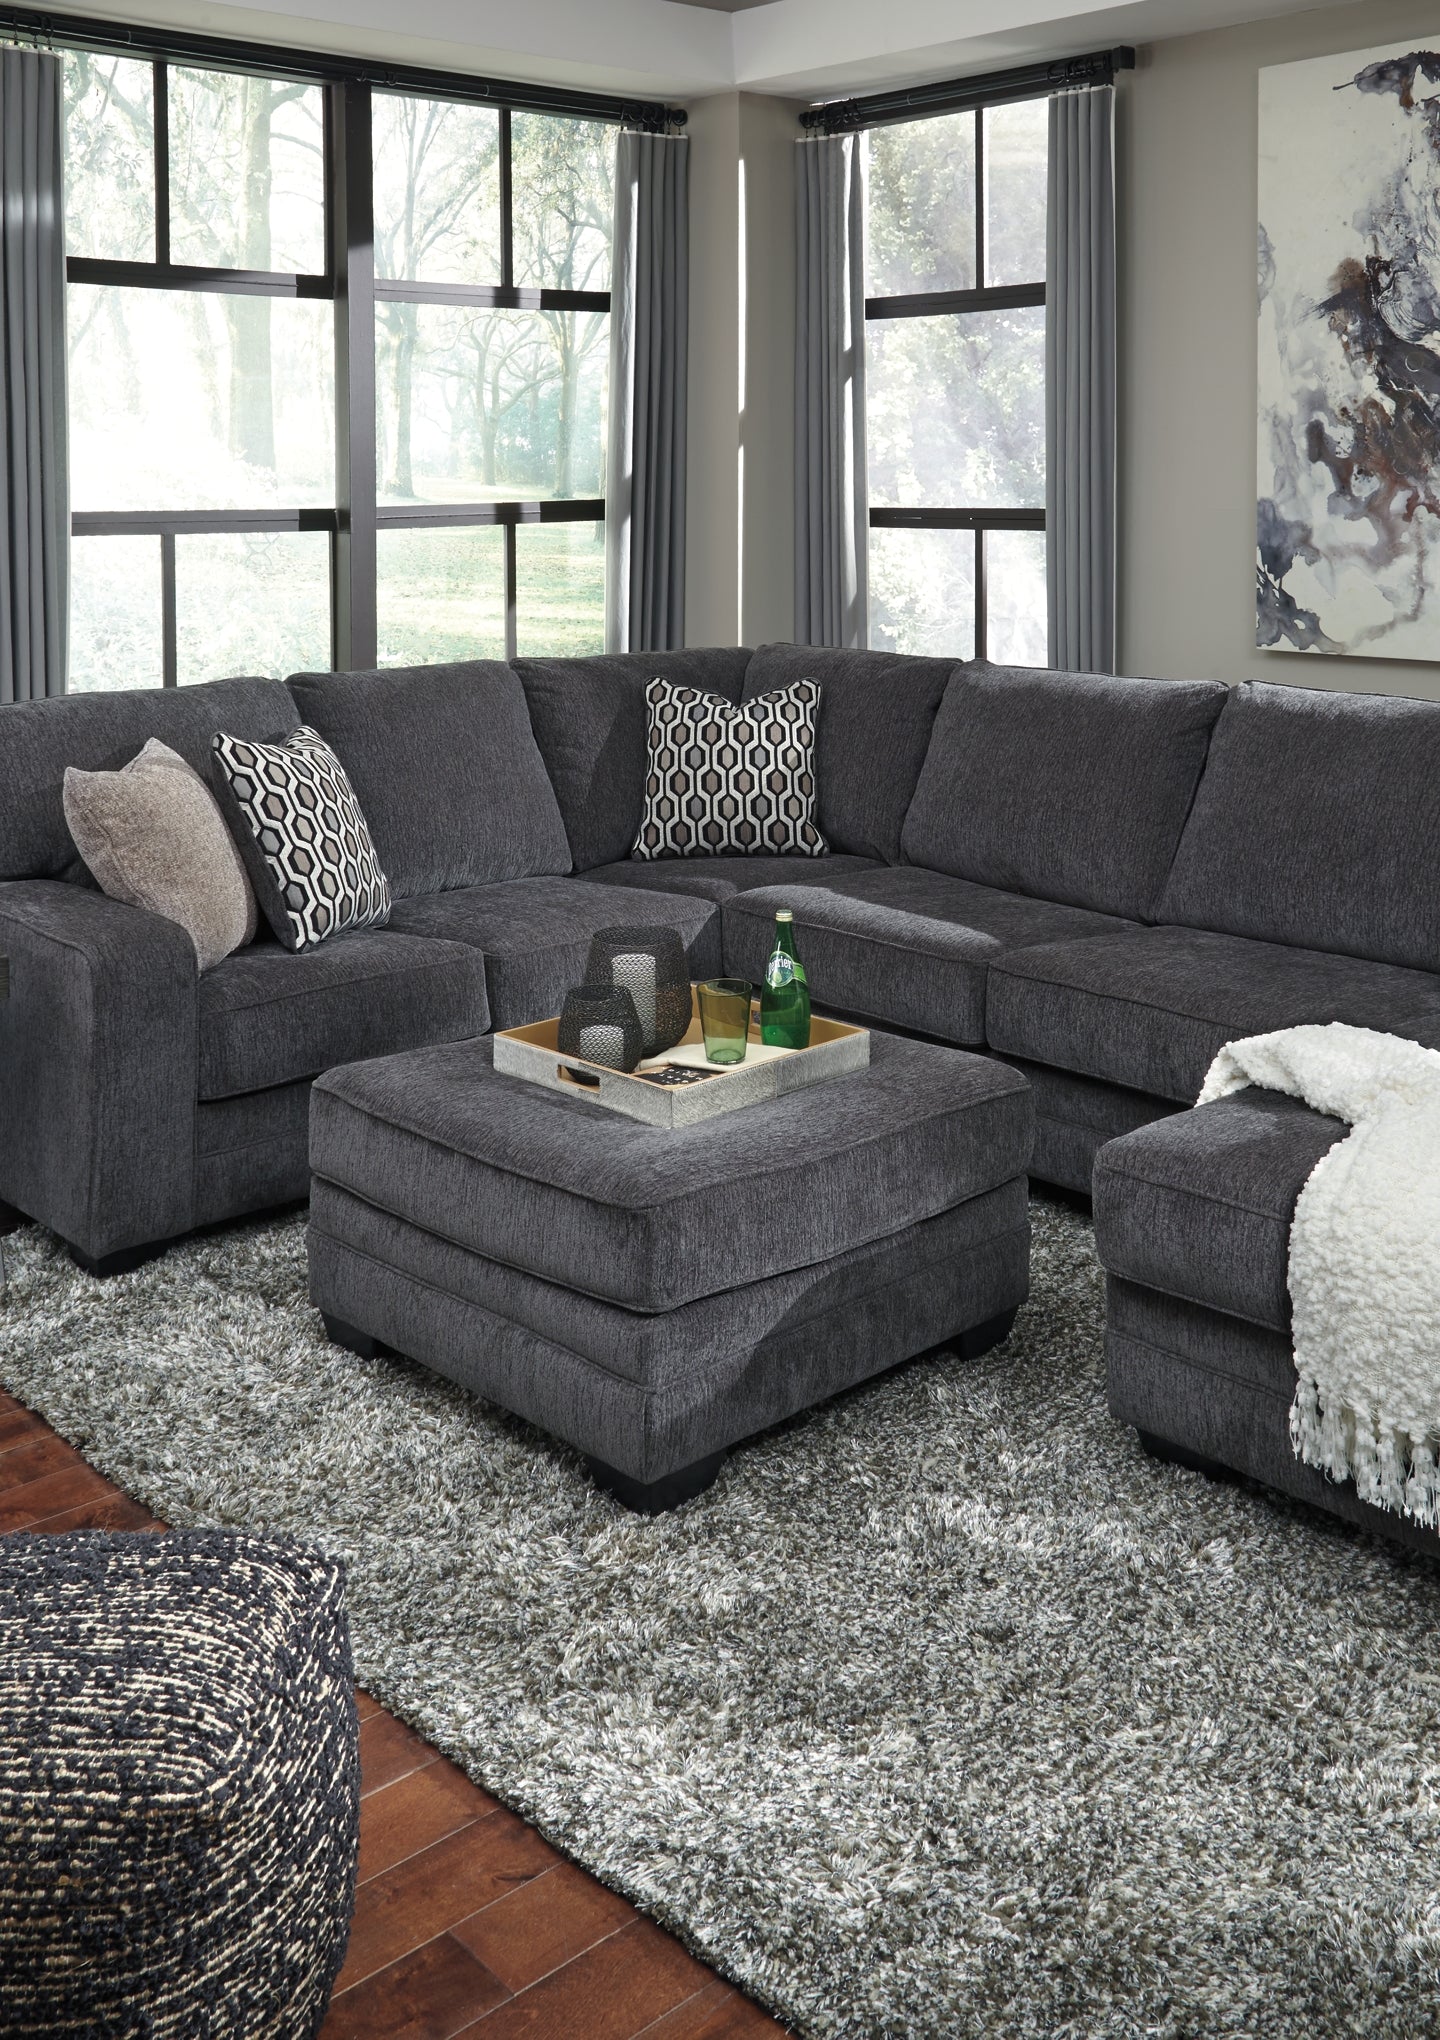 Tracling Oversized Accent Ottoman